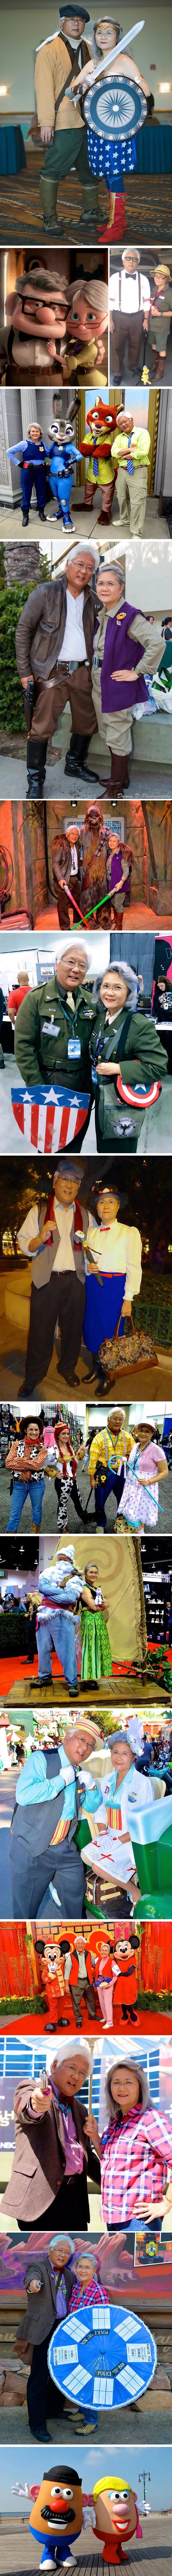 1970211395_kI06yFXE_Retired-couple-that-cosplays-together-is-the-very-definition-of-relationship-goals.jpg